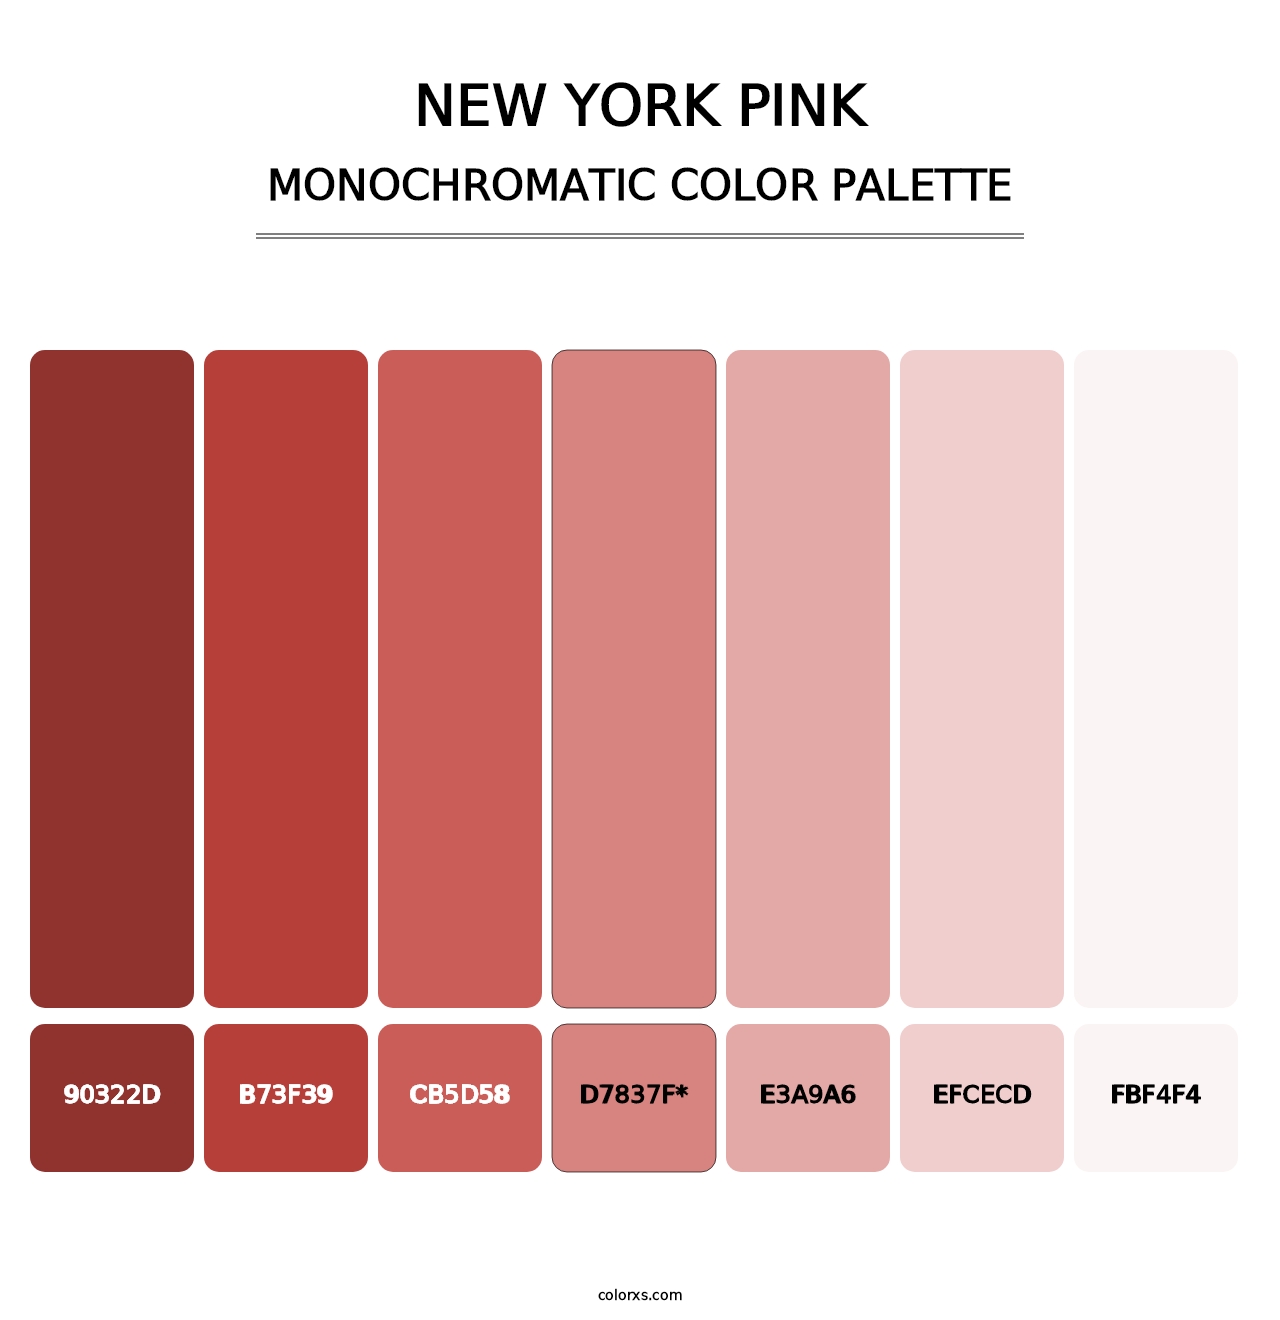 New York Pink - Monochromatic Color Palette